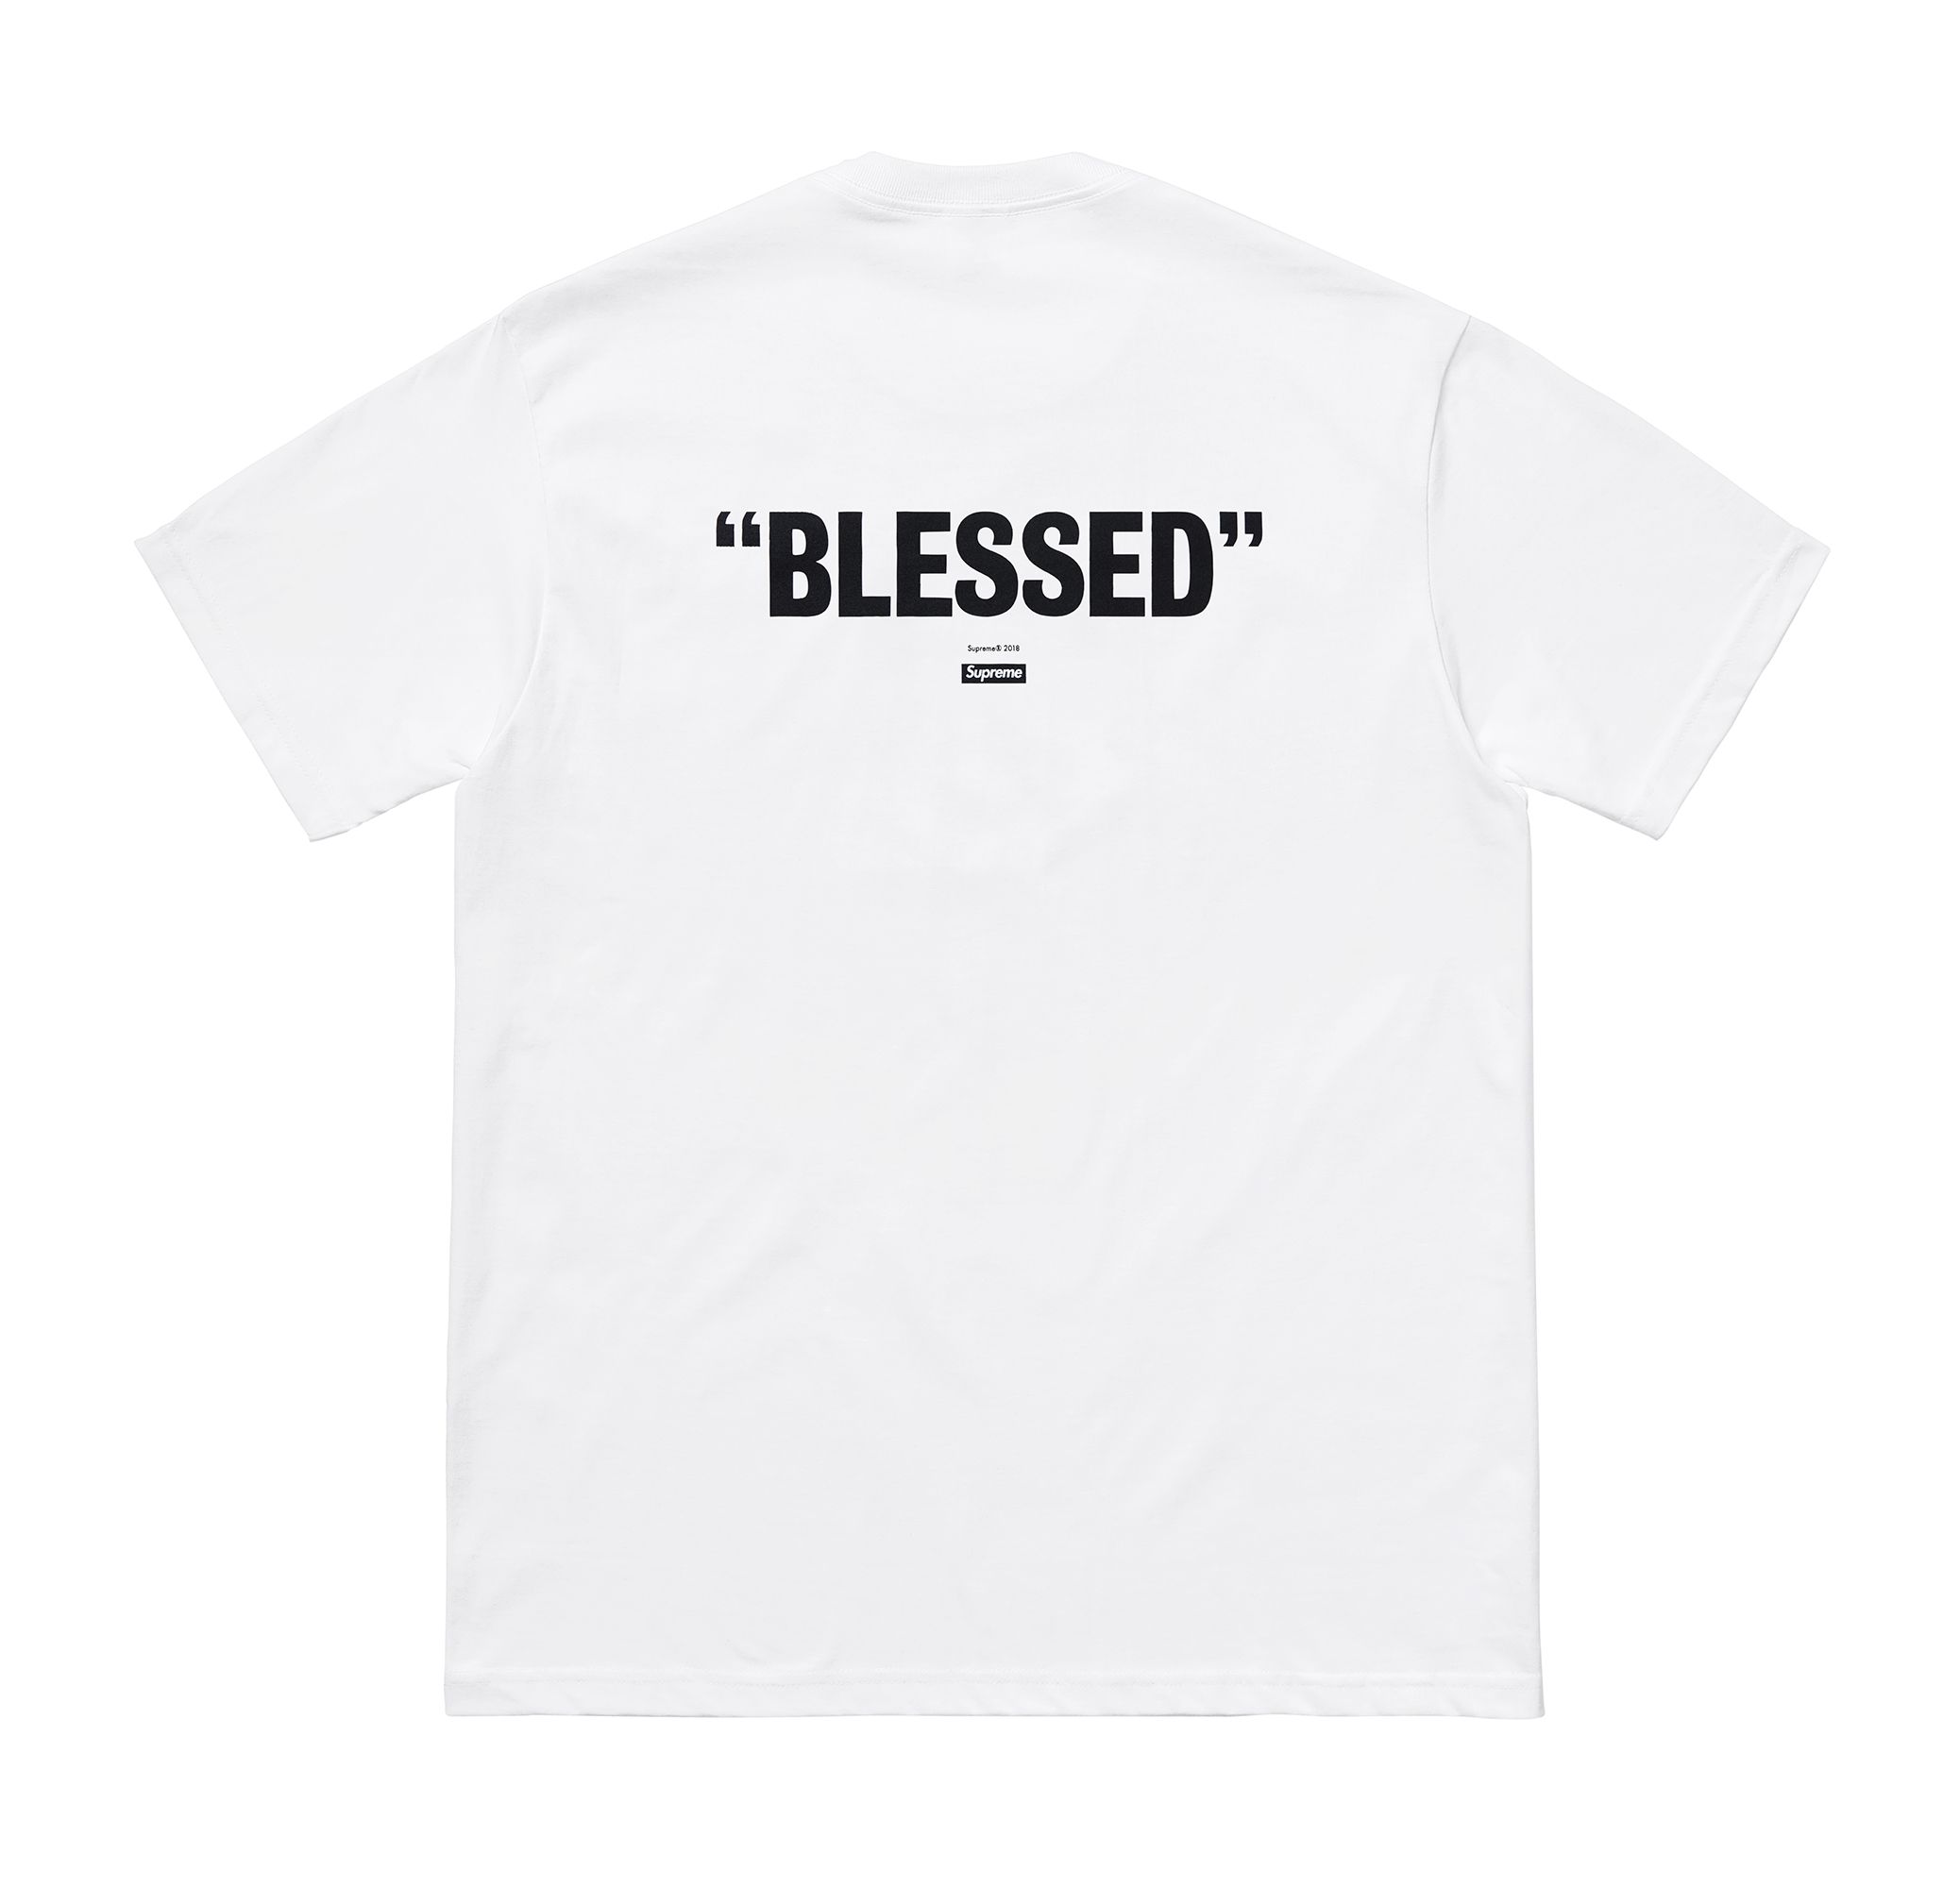 BLESSED” – Supreme